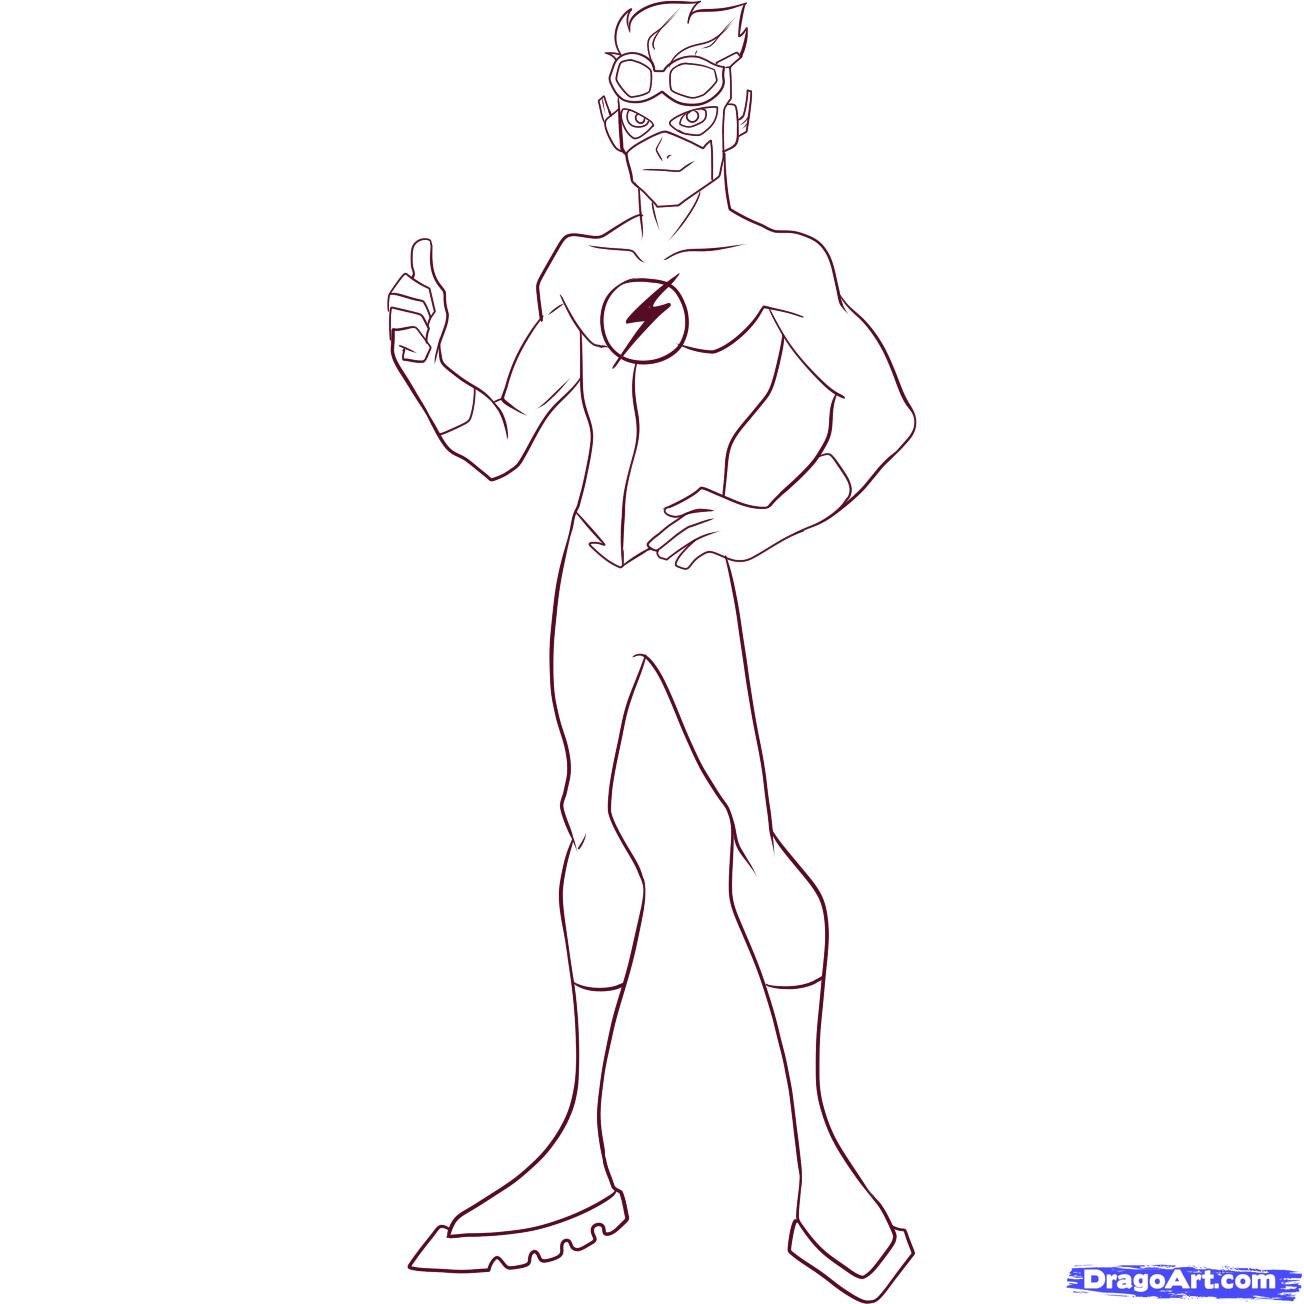 Kid Flash Coloring Pages
 How to Draw Kid Flash Step by Step Cartoon Network